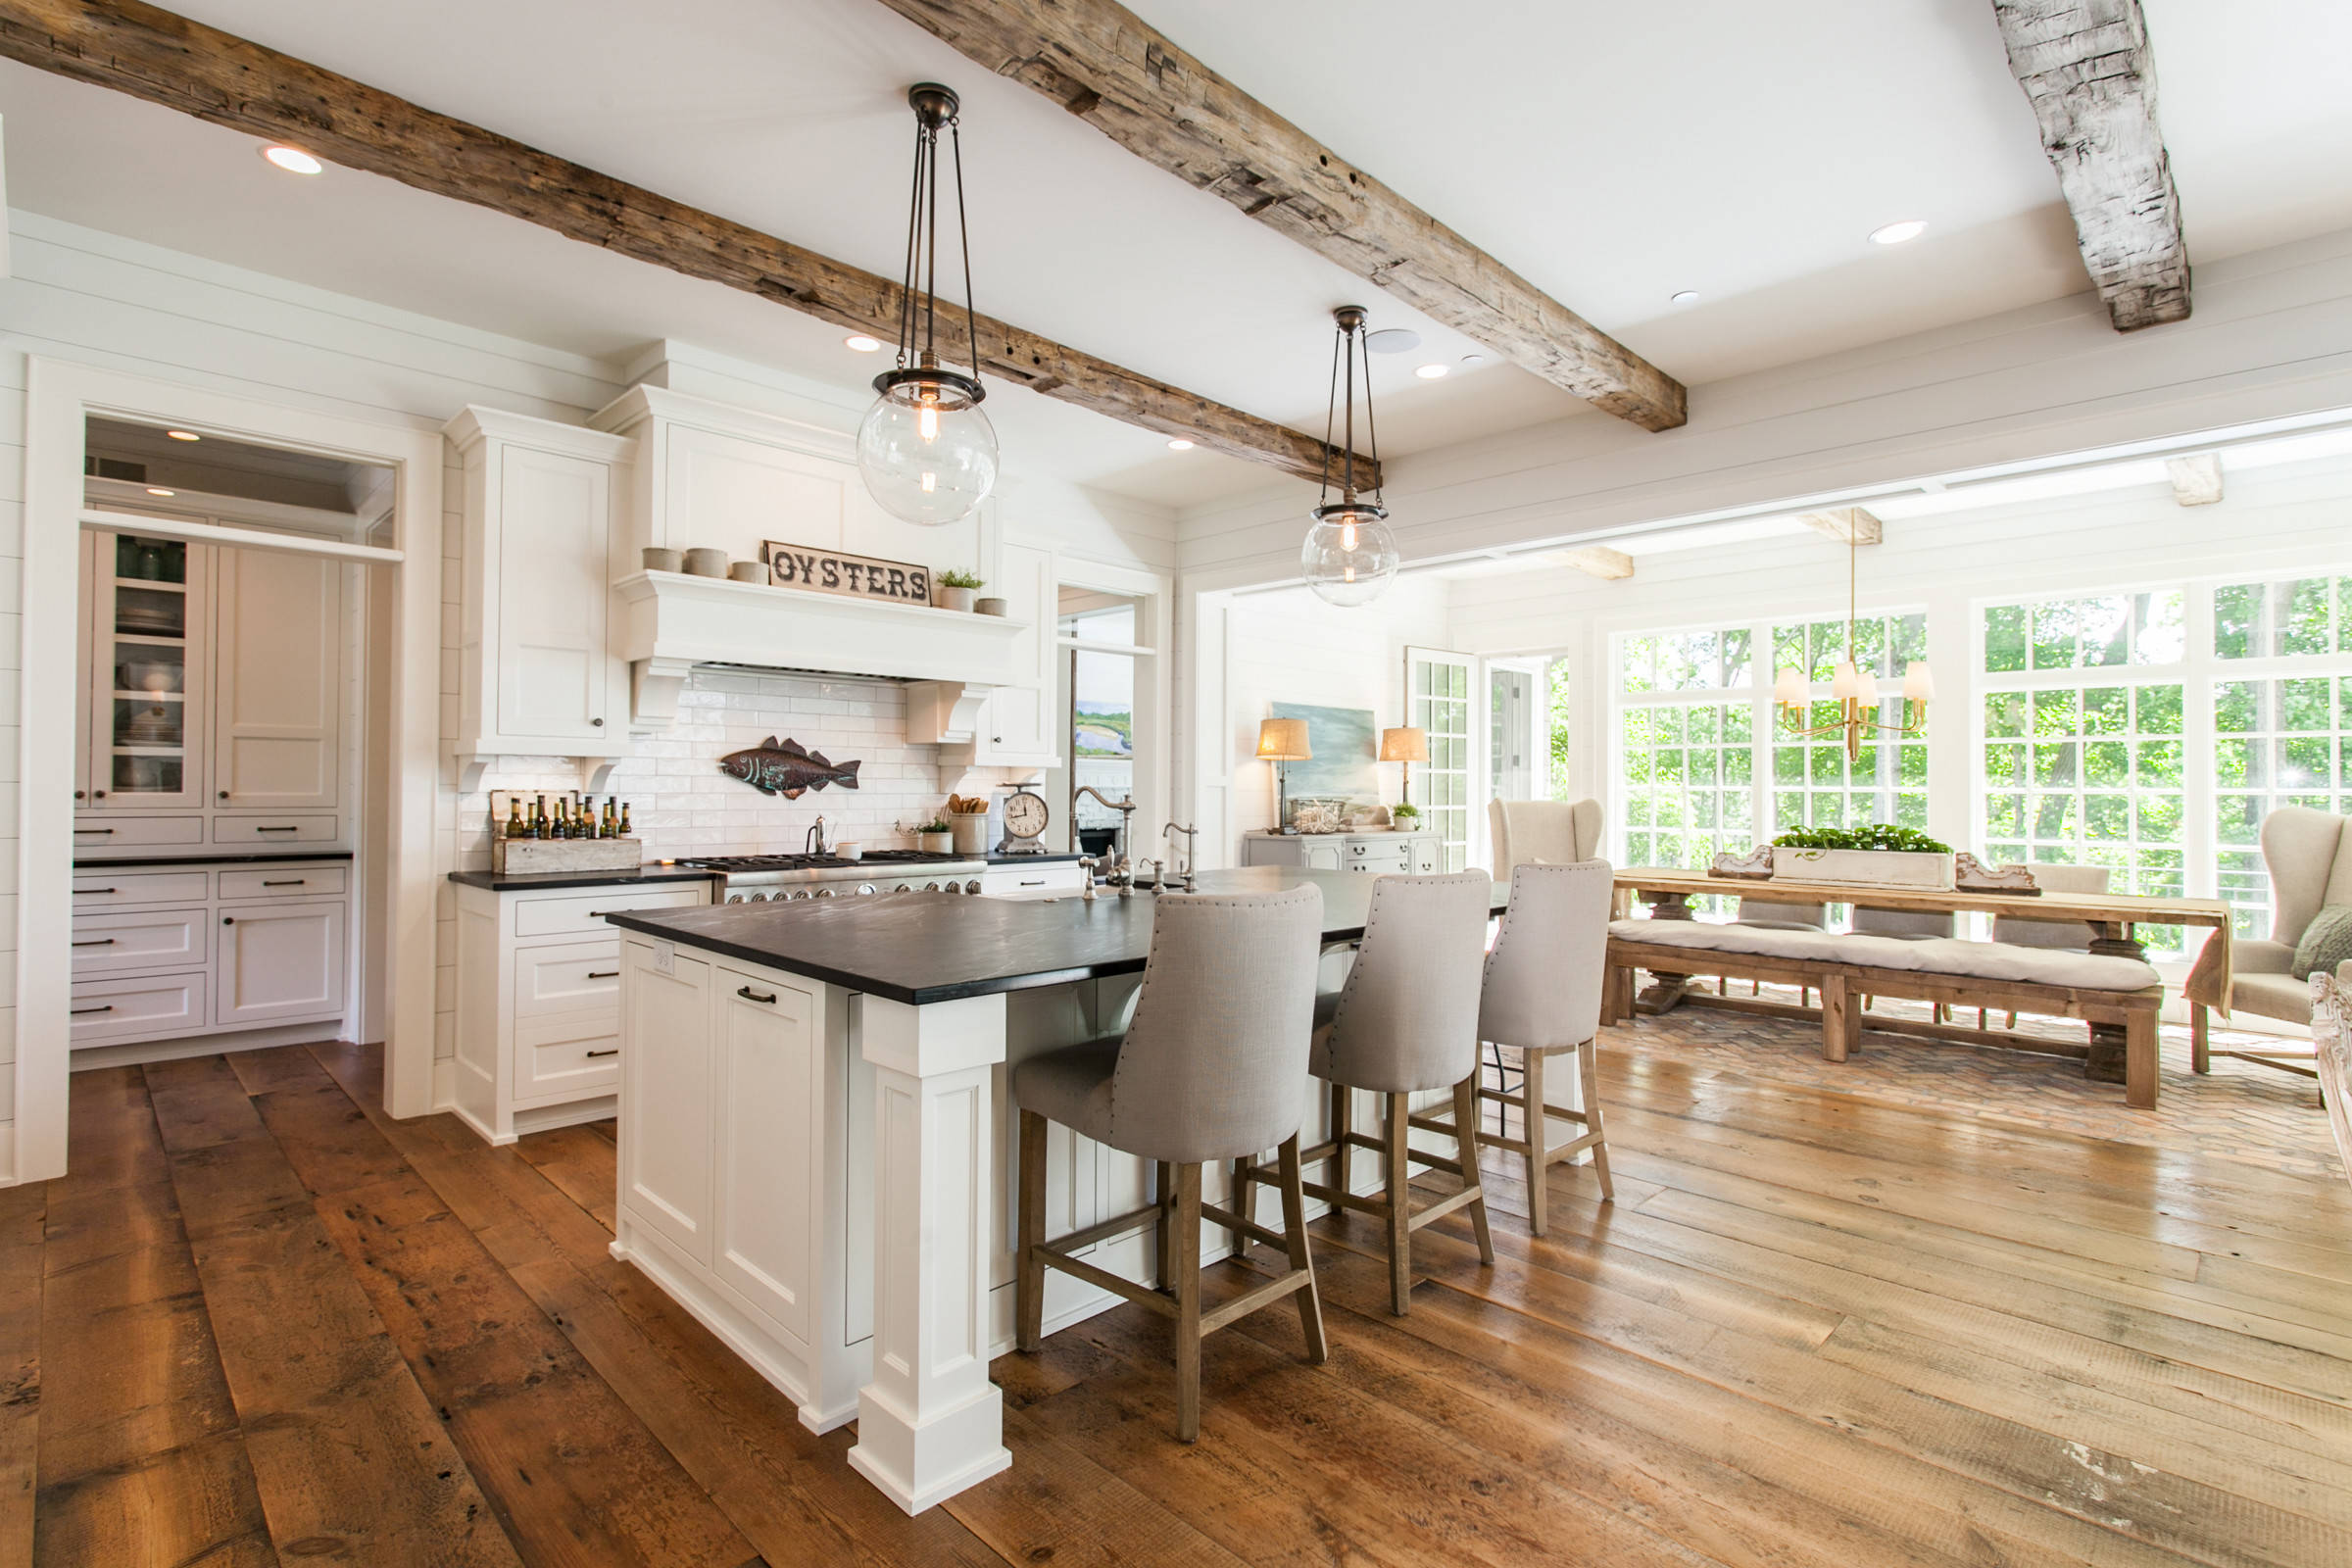 75 Beautiful Kitchen With Granite Countertops And Black Countertops Pictures Ideas November 2020 Houzz